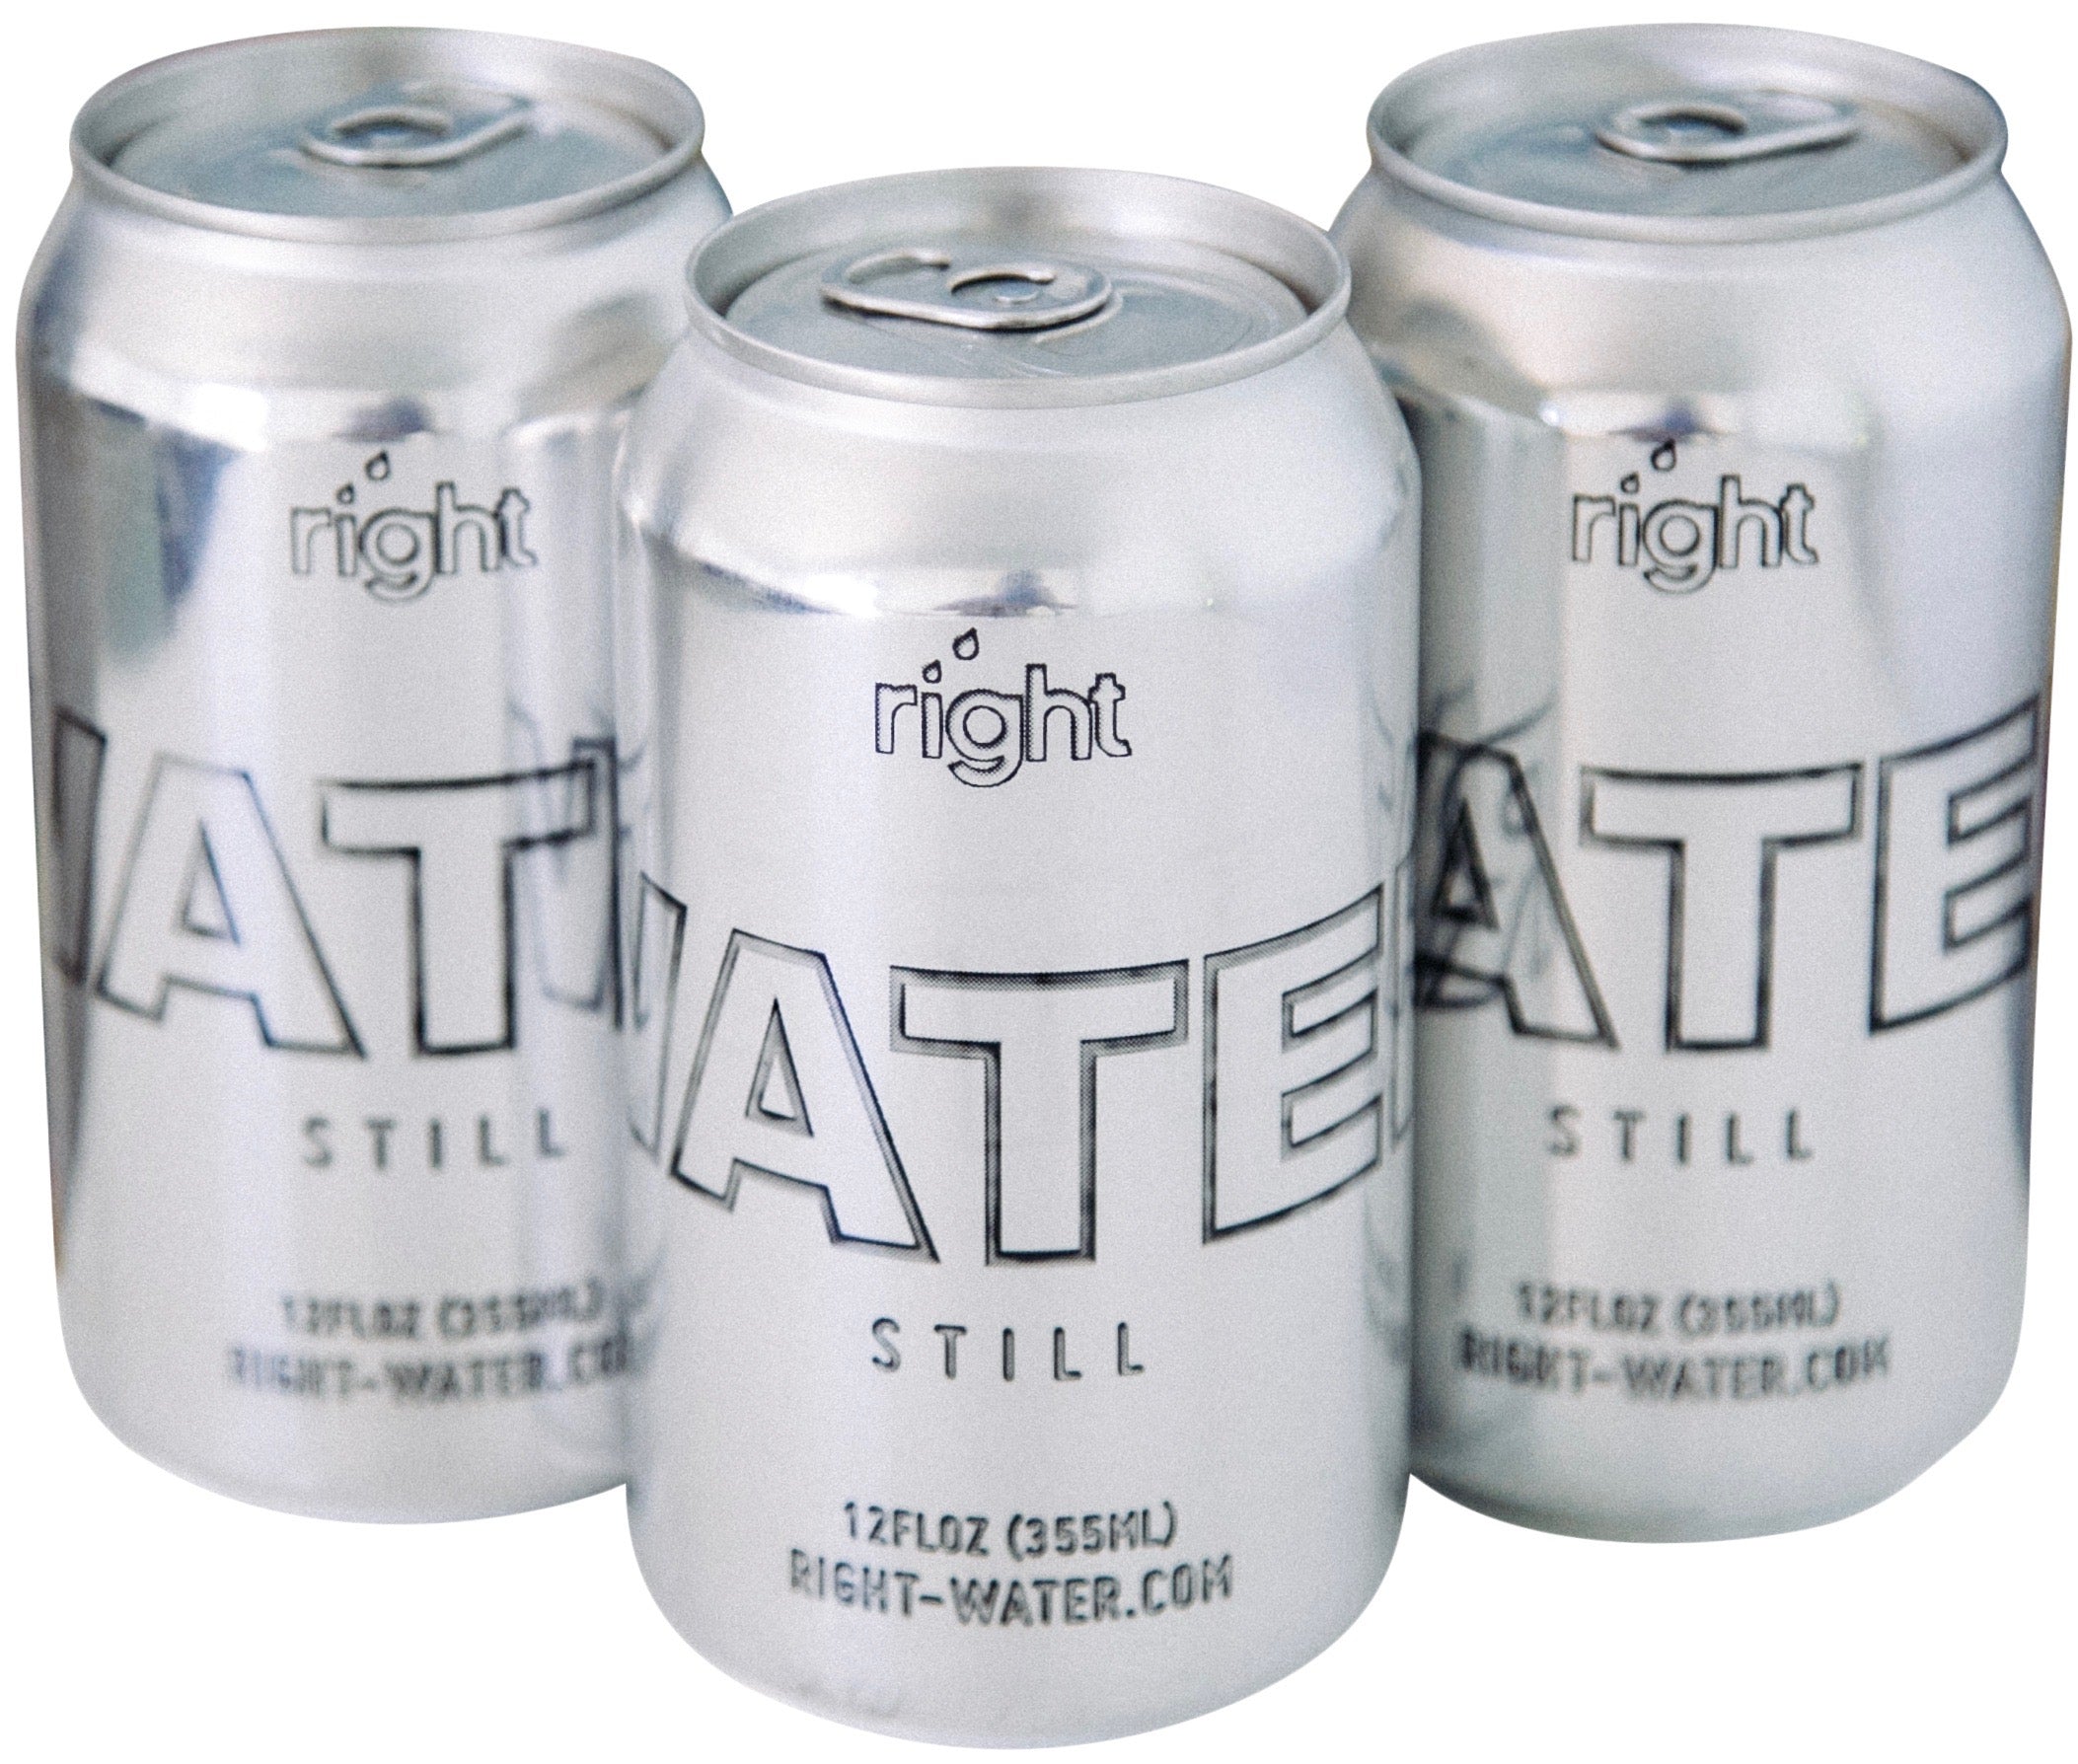 RightWater Cans (24 x 12 fl oz.)